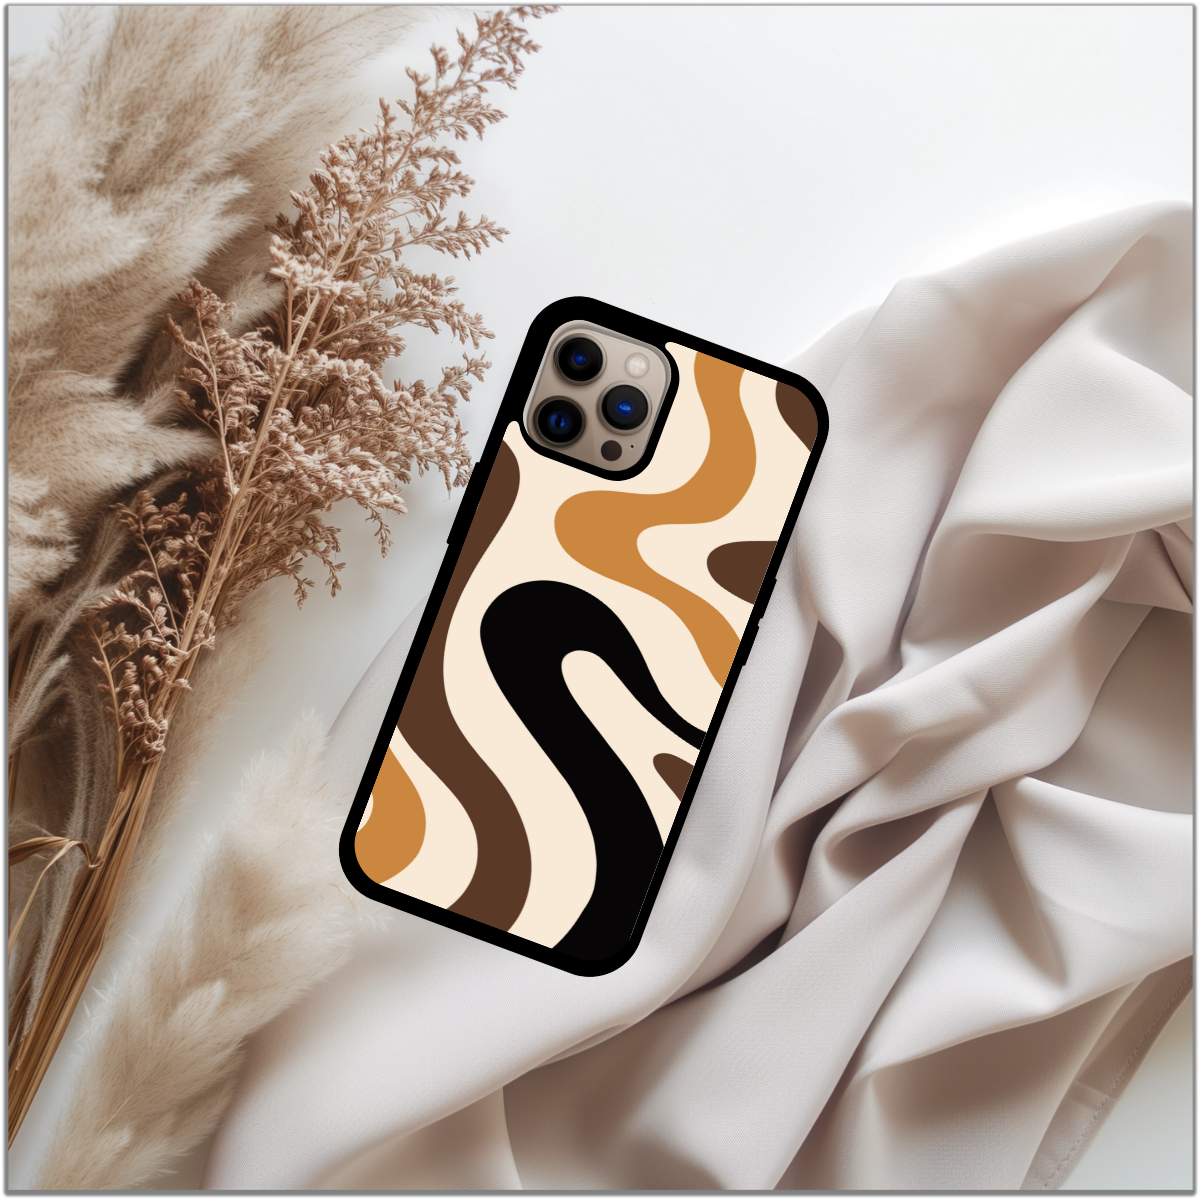 Retro phone case perfect gift for her - cute phone case - best birthday gift - iphone case - girly phone case - pretty phone case - artsy phone case - swirly phone case